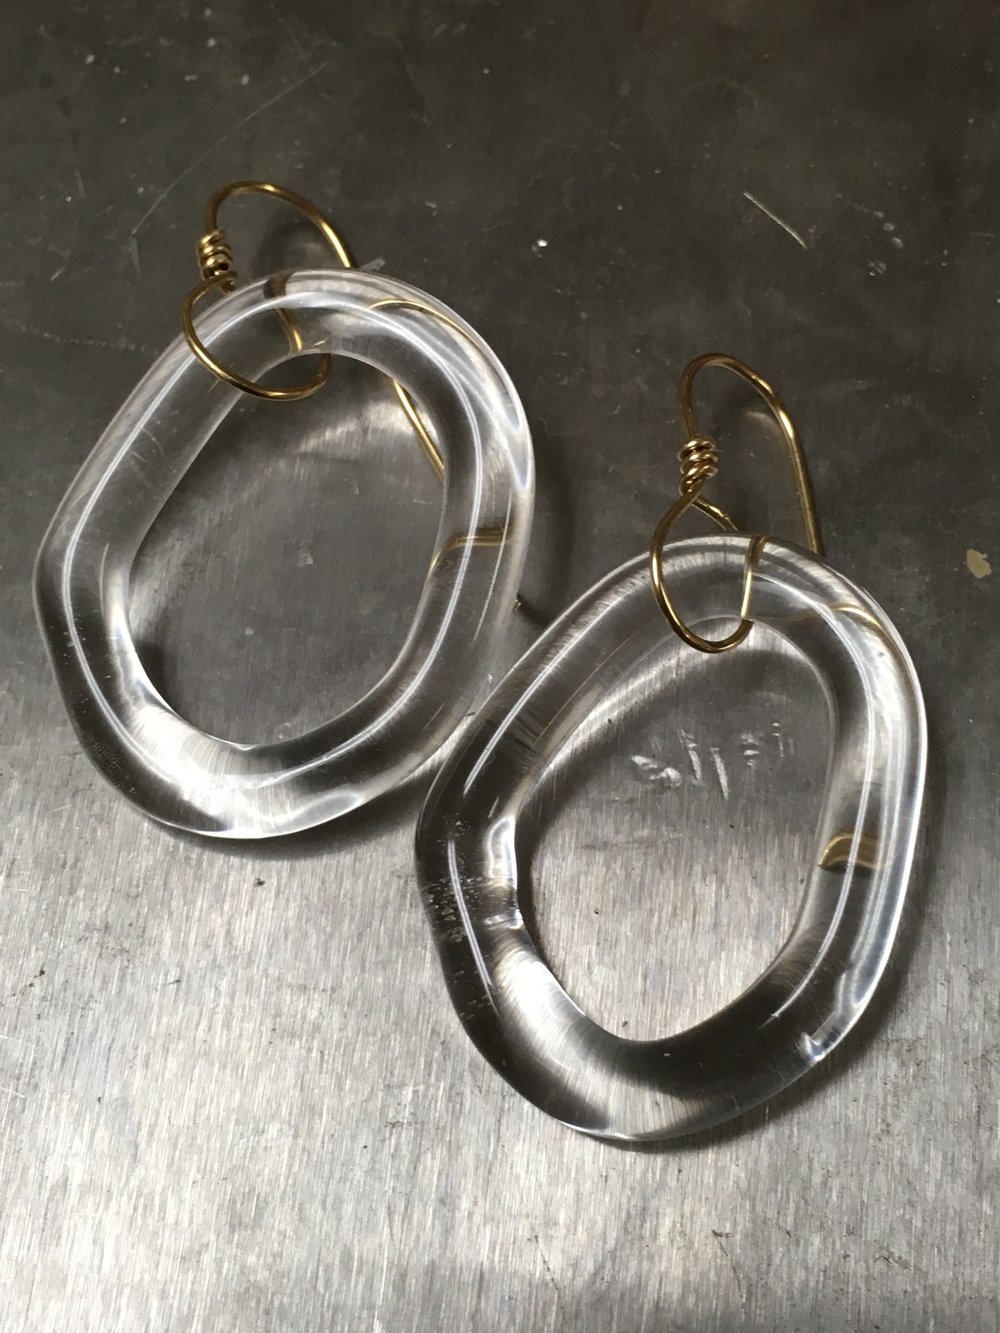 Clear Glass Hoop Earrings with Gold Filled Ear Wires — The Glass